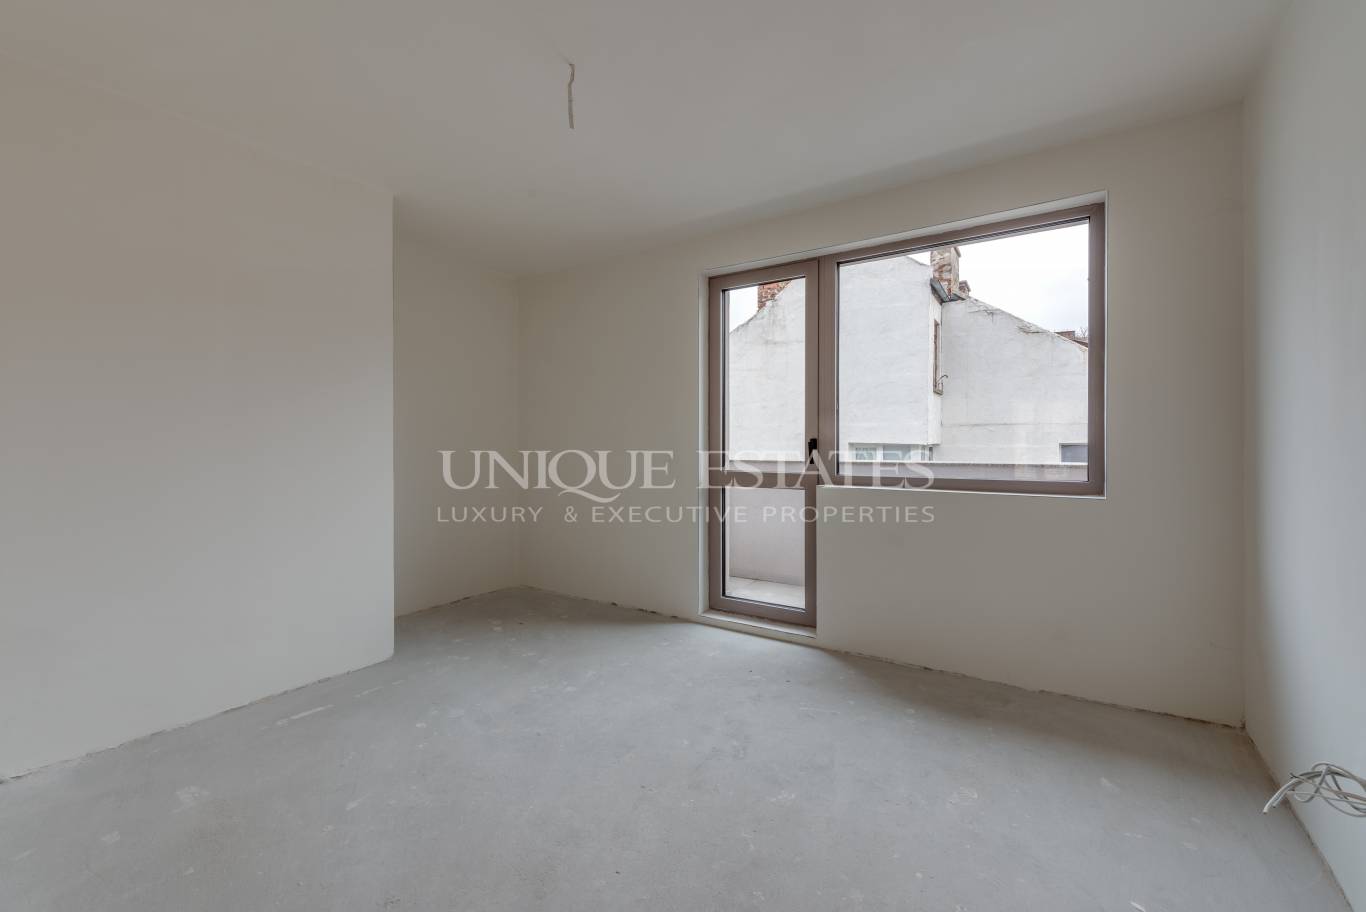 Apartment for sale in Sofia, Downtown with listing ID: K14486 - image 7